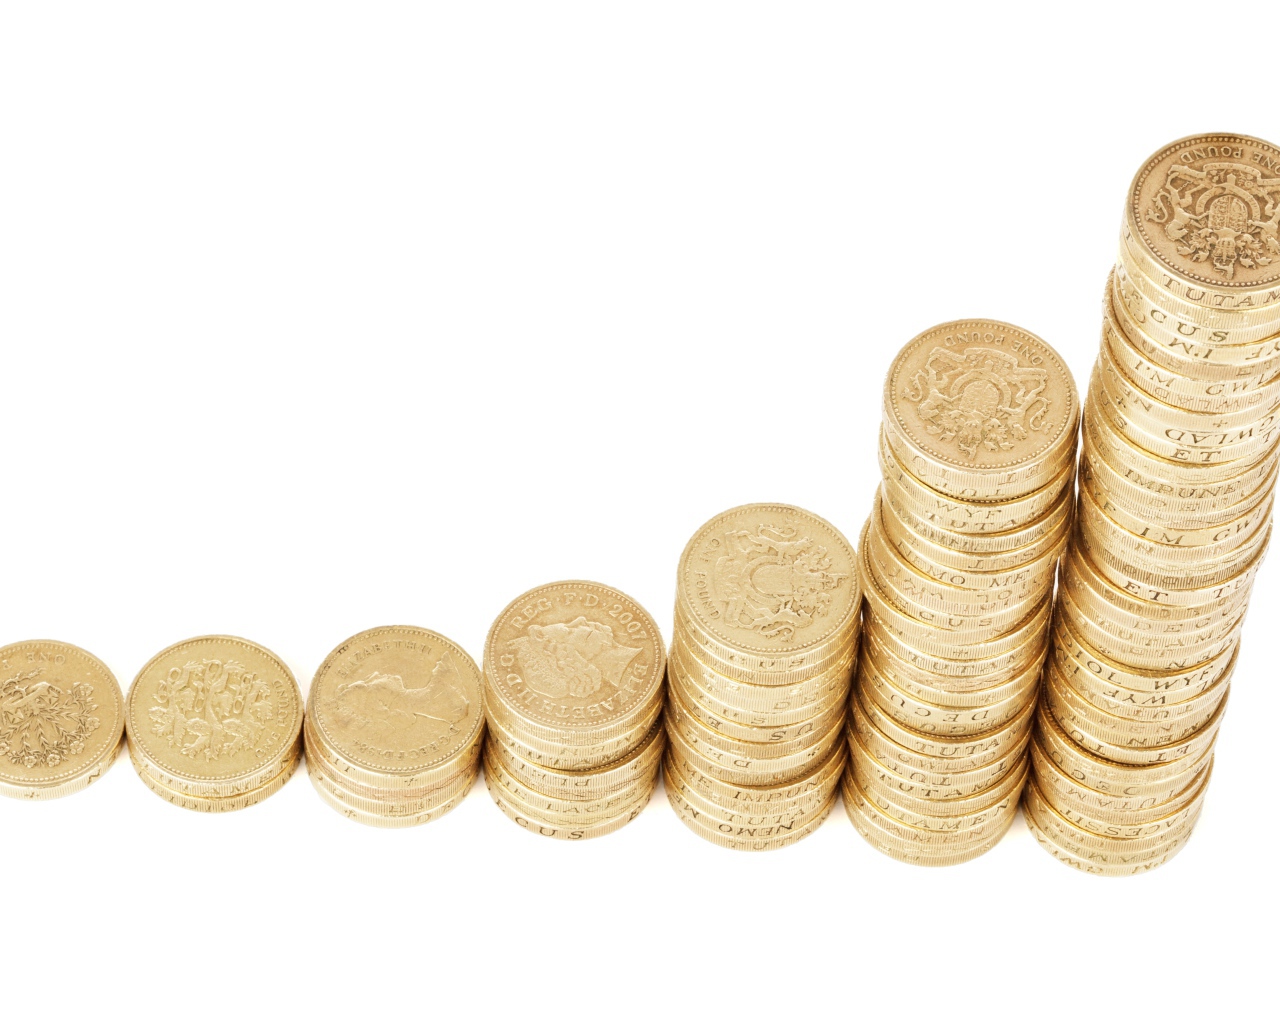 Stacks of gold coins on a white background